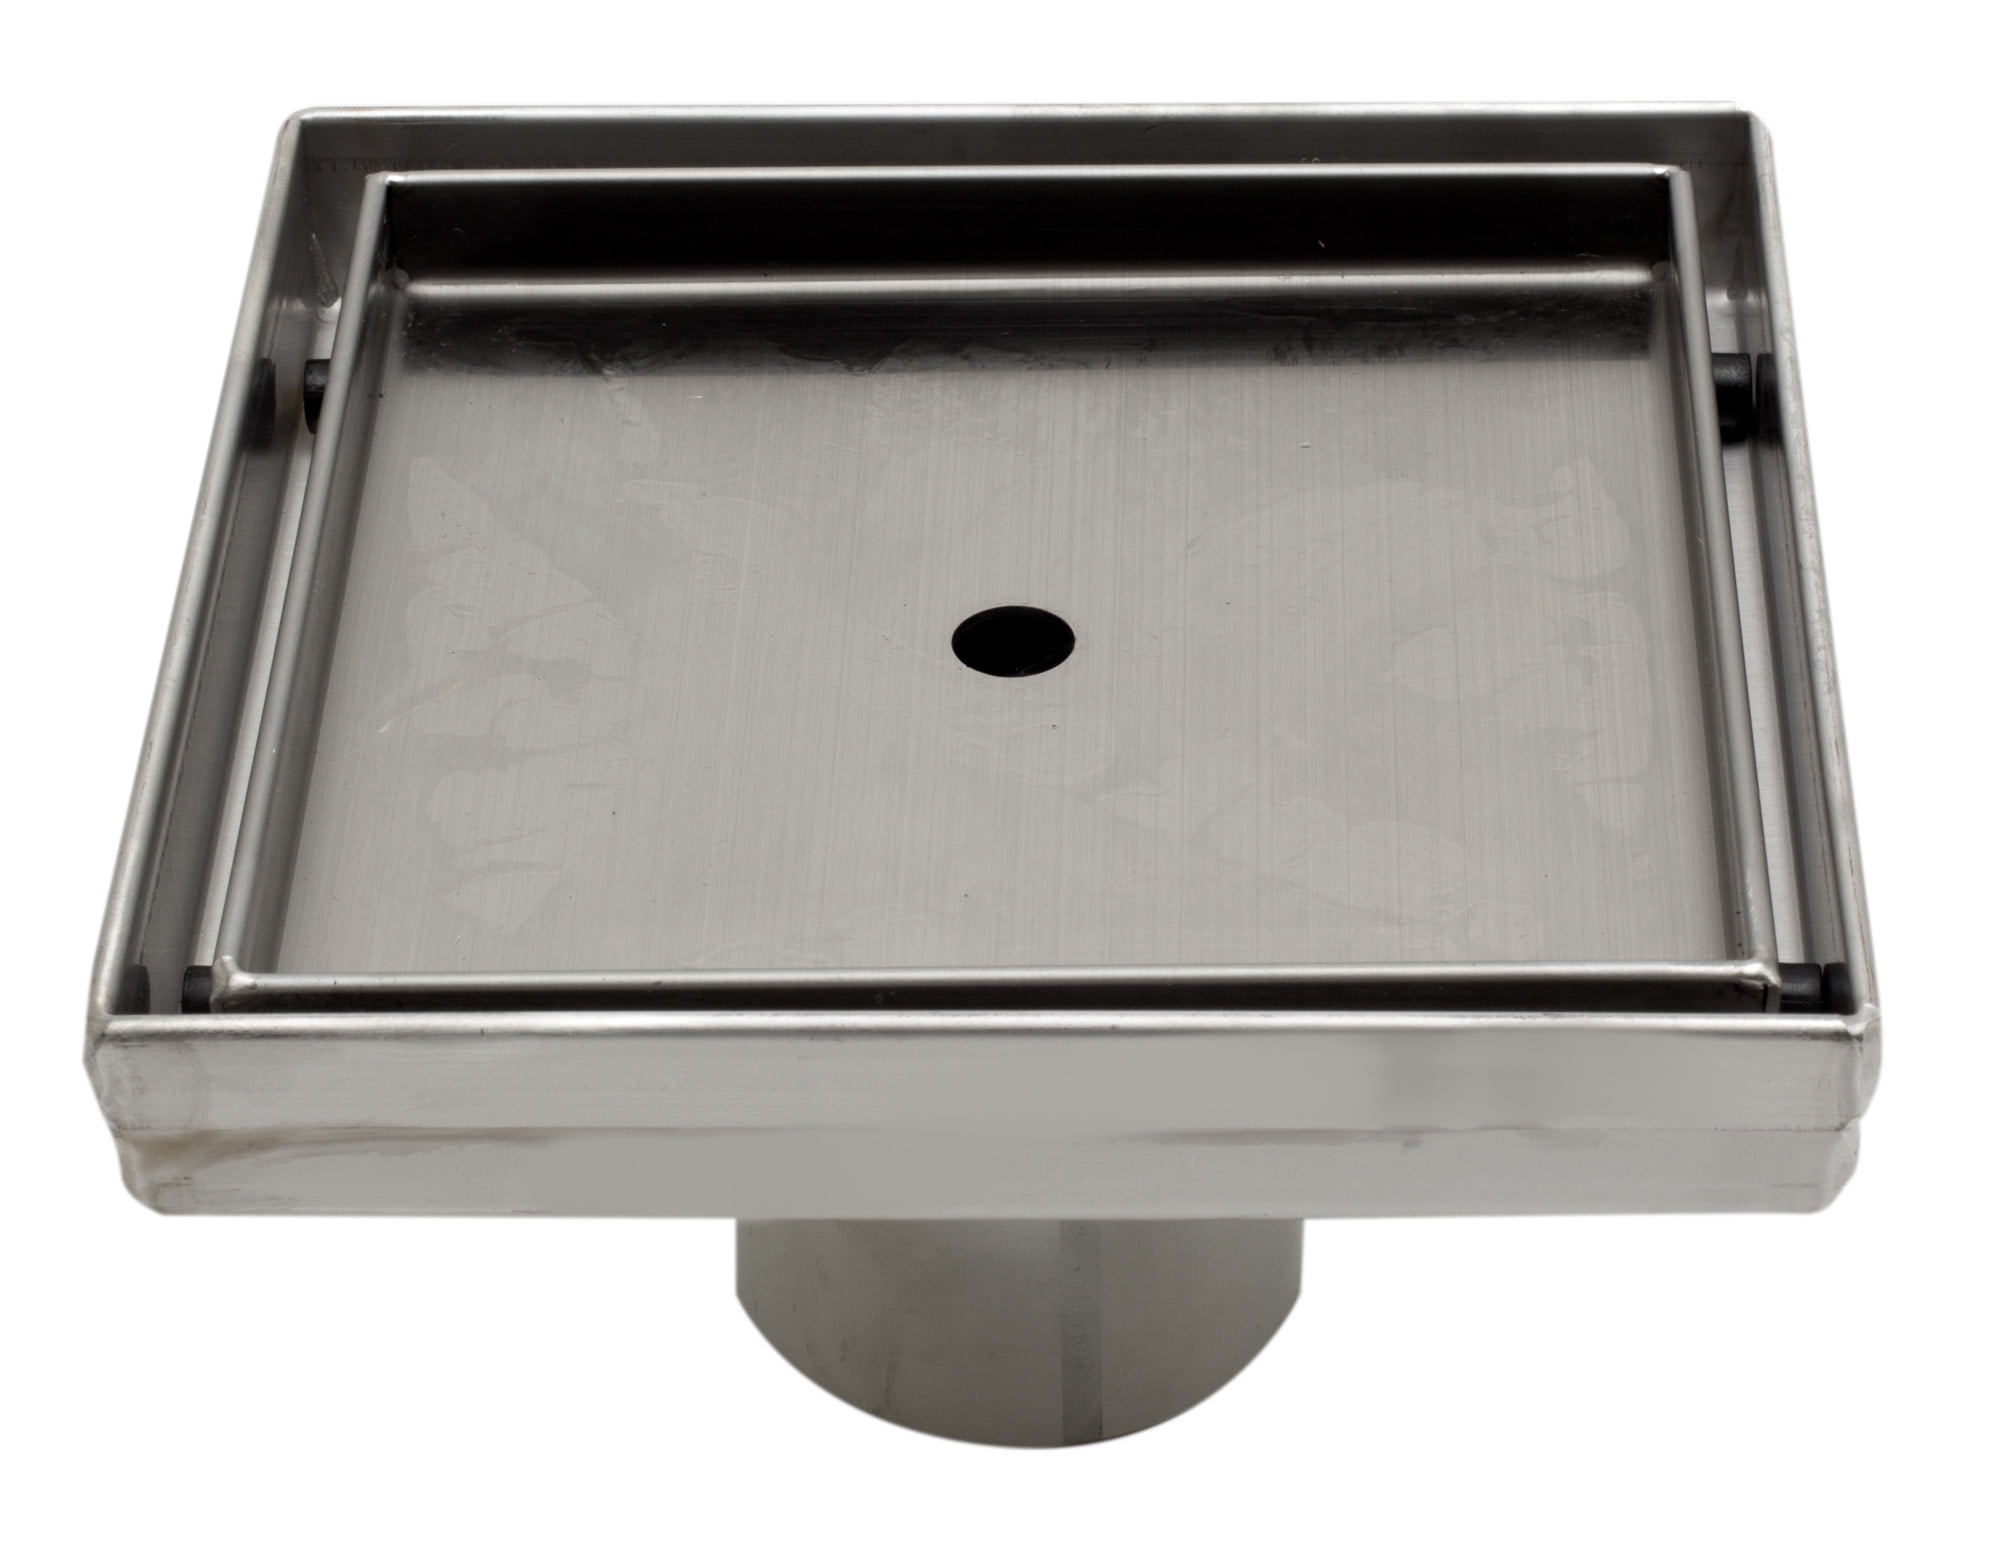 5 X 5 In. Modern Square Stainless Steel Shower Drain With Cover